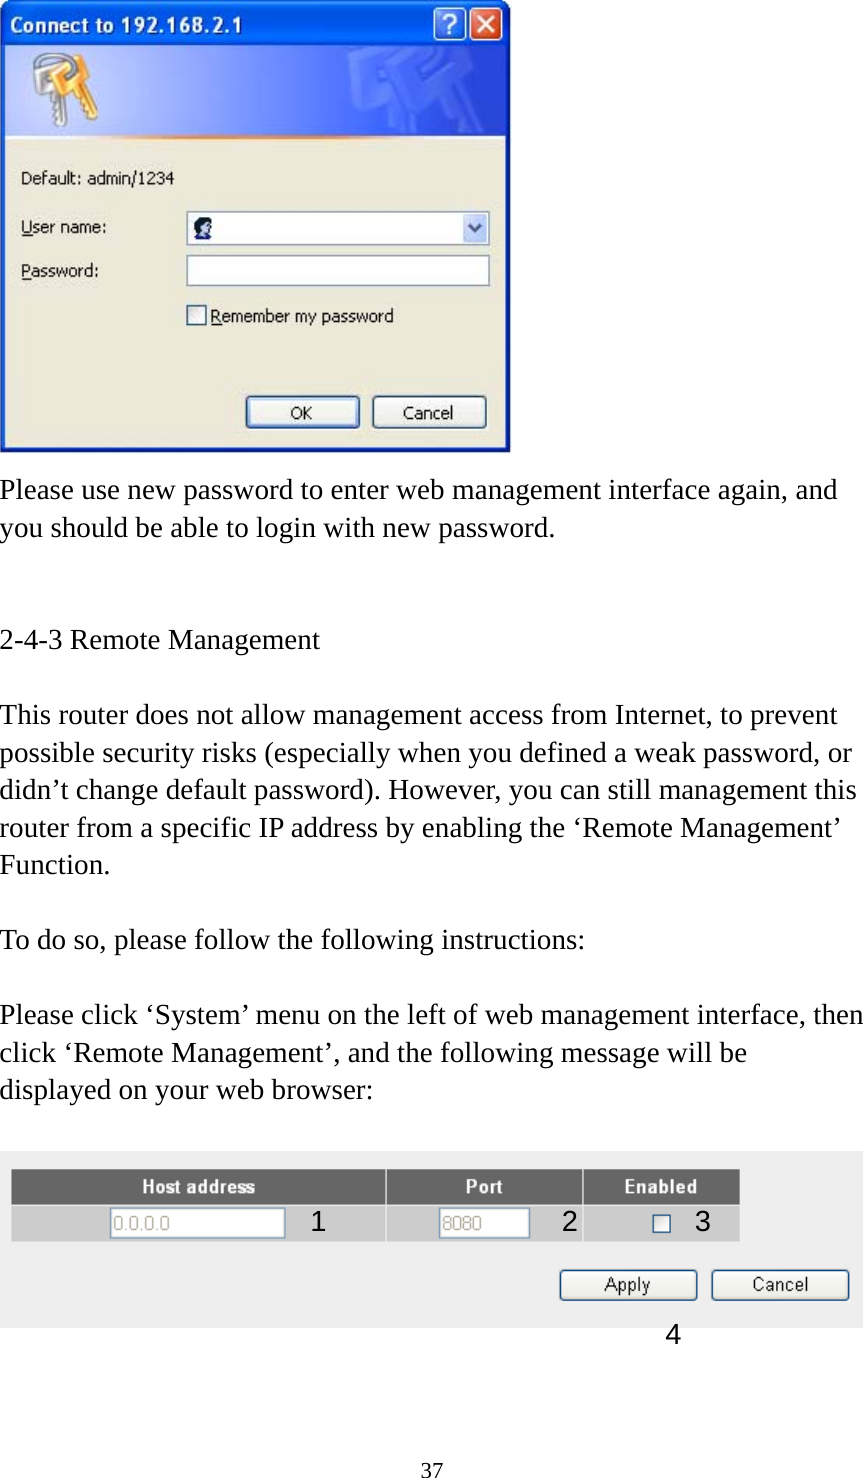 37  Please use new password to enter web management interface again, and you should be able to login with new password.   2-4-3 Remote Management  This router does not allow management access from Internet, to prevent possible security risks (especially when you defined a weak password, or didn’t change default password). However, you can still management this router from a specific IP address by enabling the ‘Remote Management’ Function.  To do so, please follow the following instructions:  Please click ‘System’ menu on the left of web management interface, then click ‘Remote Management’, and the following message will be displayed on your web browser:     1234